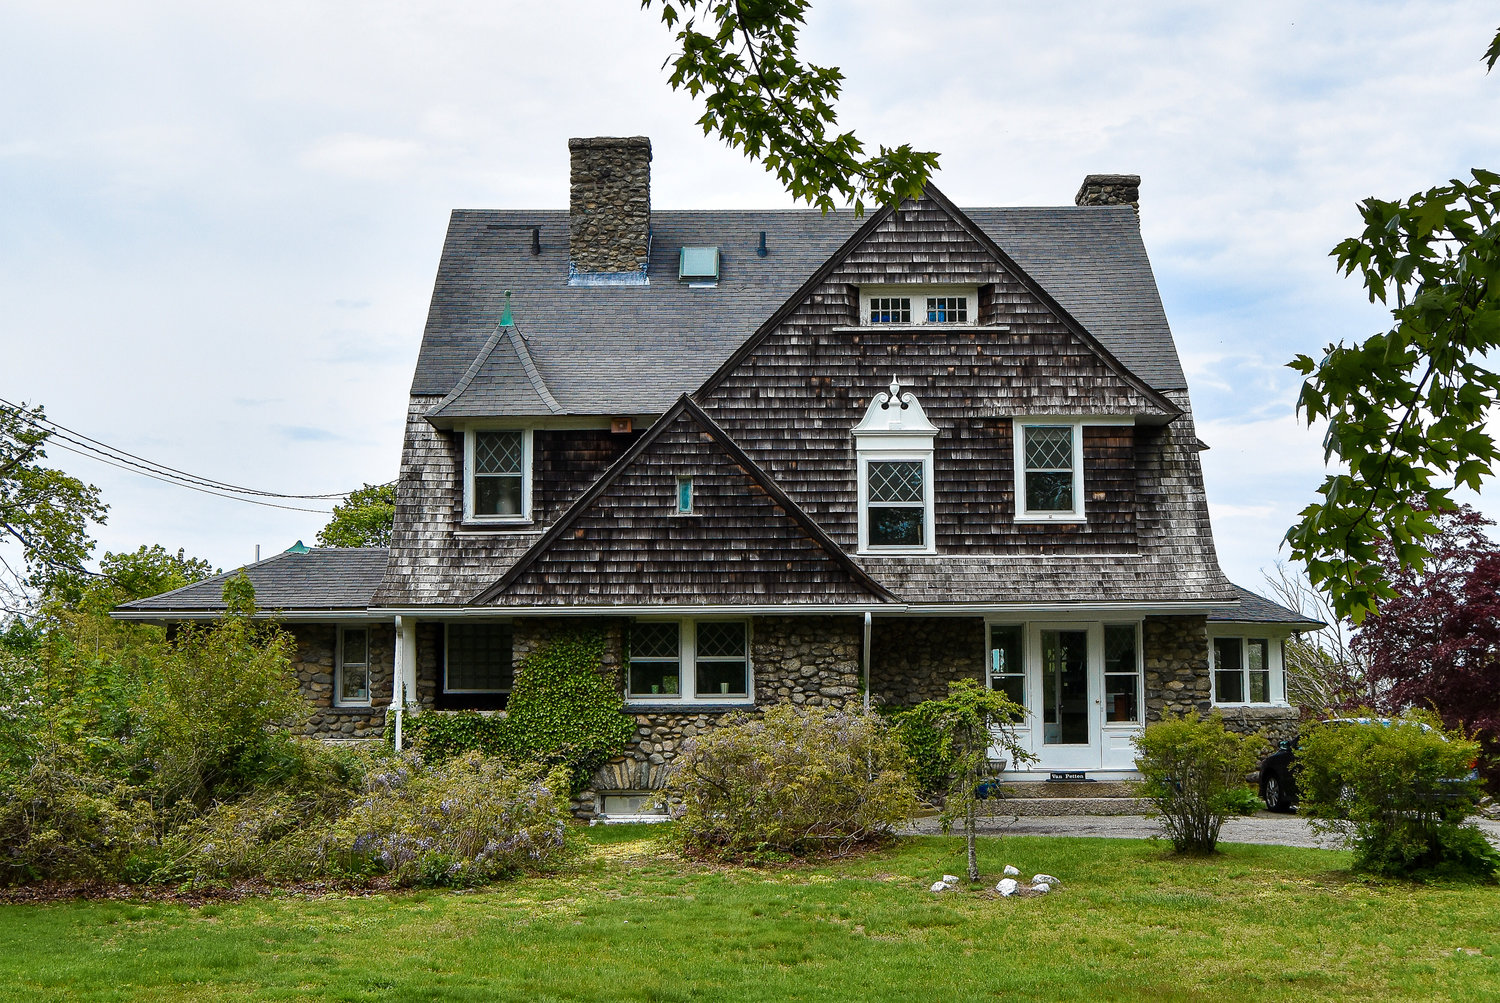 Shingle Style, Newport: Although they can be found throughout the US, shingle style homes feel particularly rooted in New England to me. There’s something about a weathered cedar shake with Nantucket blue trim that’s an essential part of our vernacular architecture here.